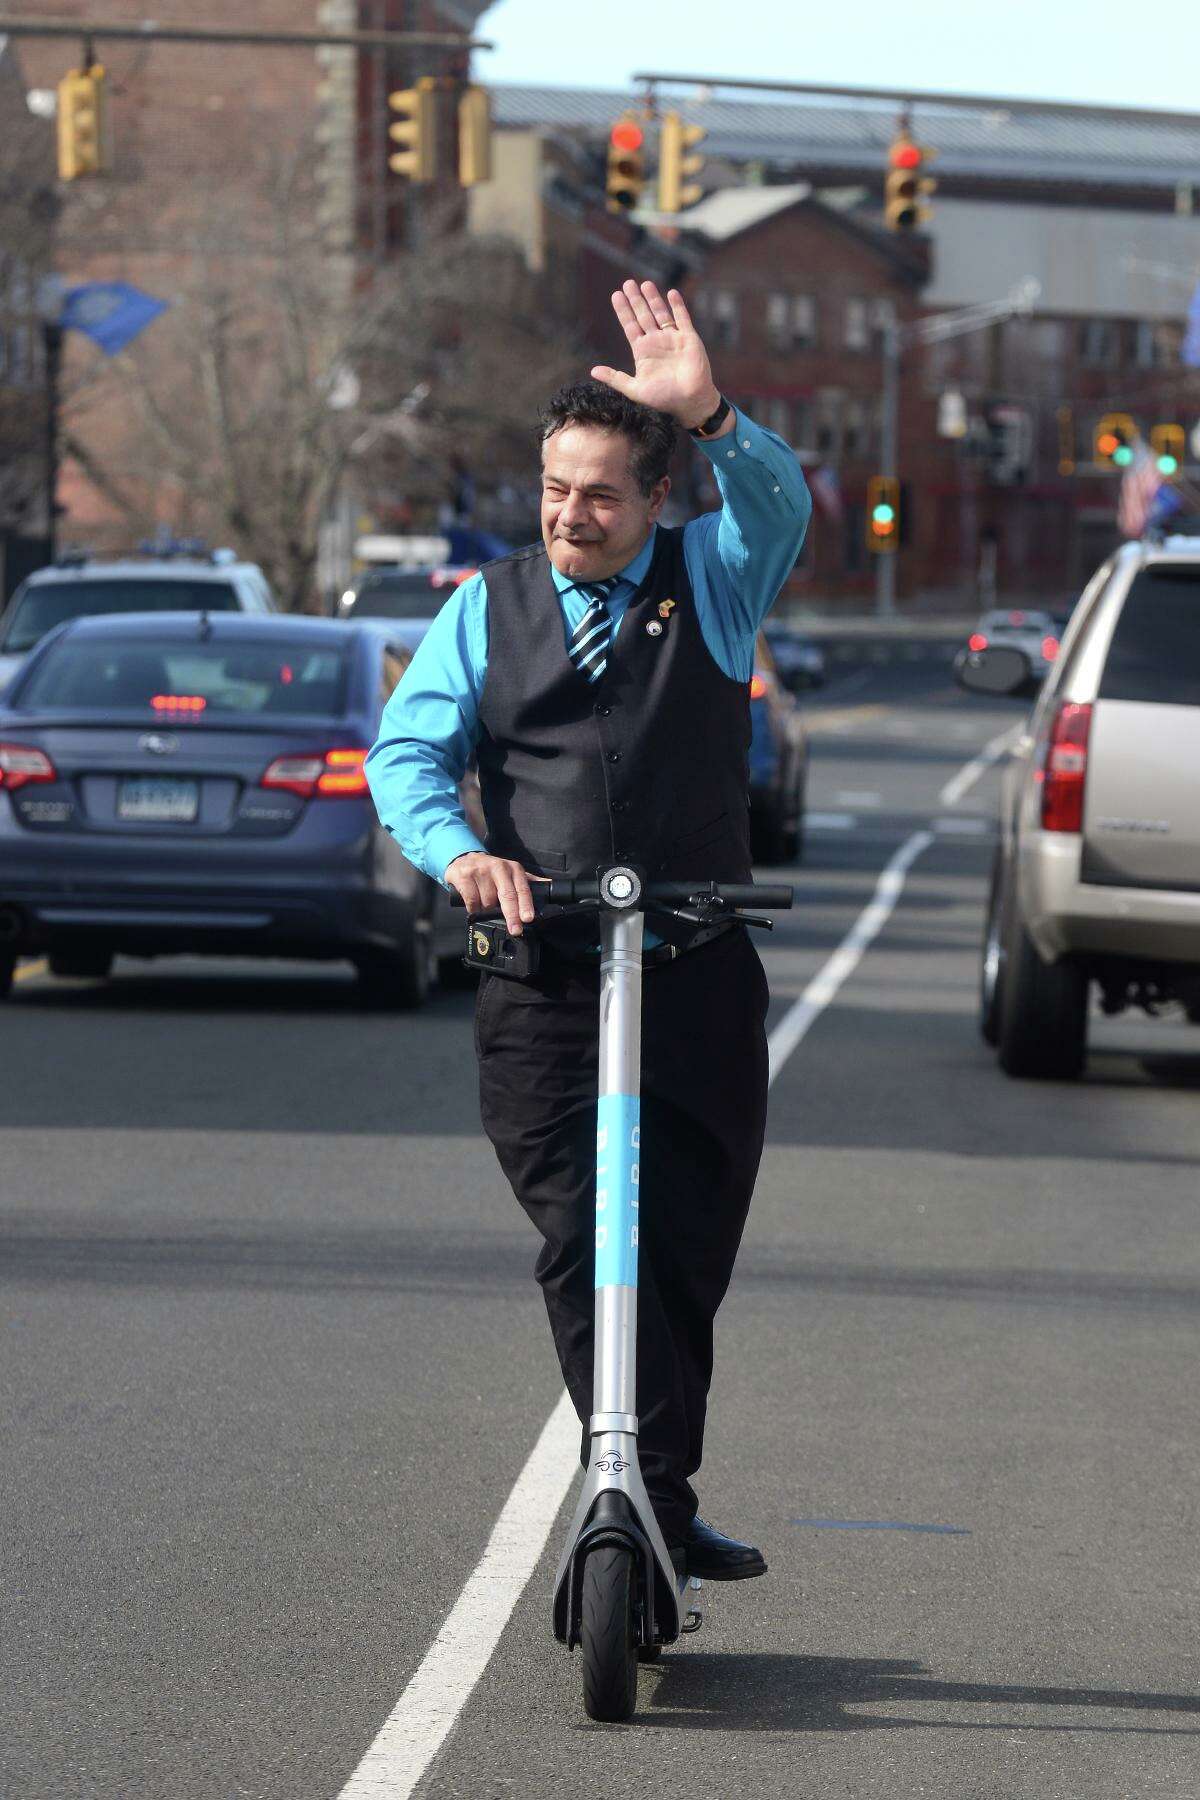 Mayor David Cassetti rides a Bird e-scooter along Main Street during a demonstration event in Ansonia, Conn. March 2022.